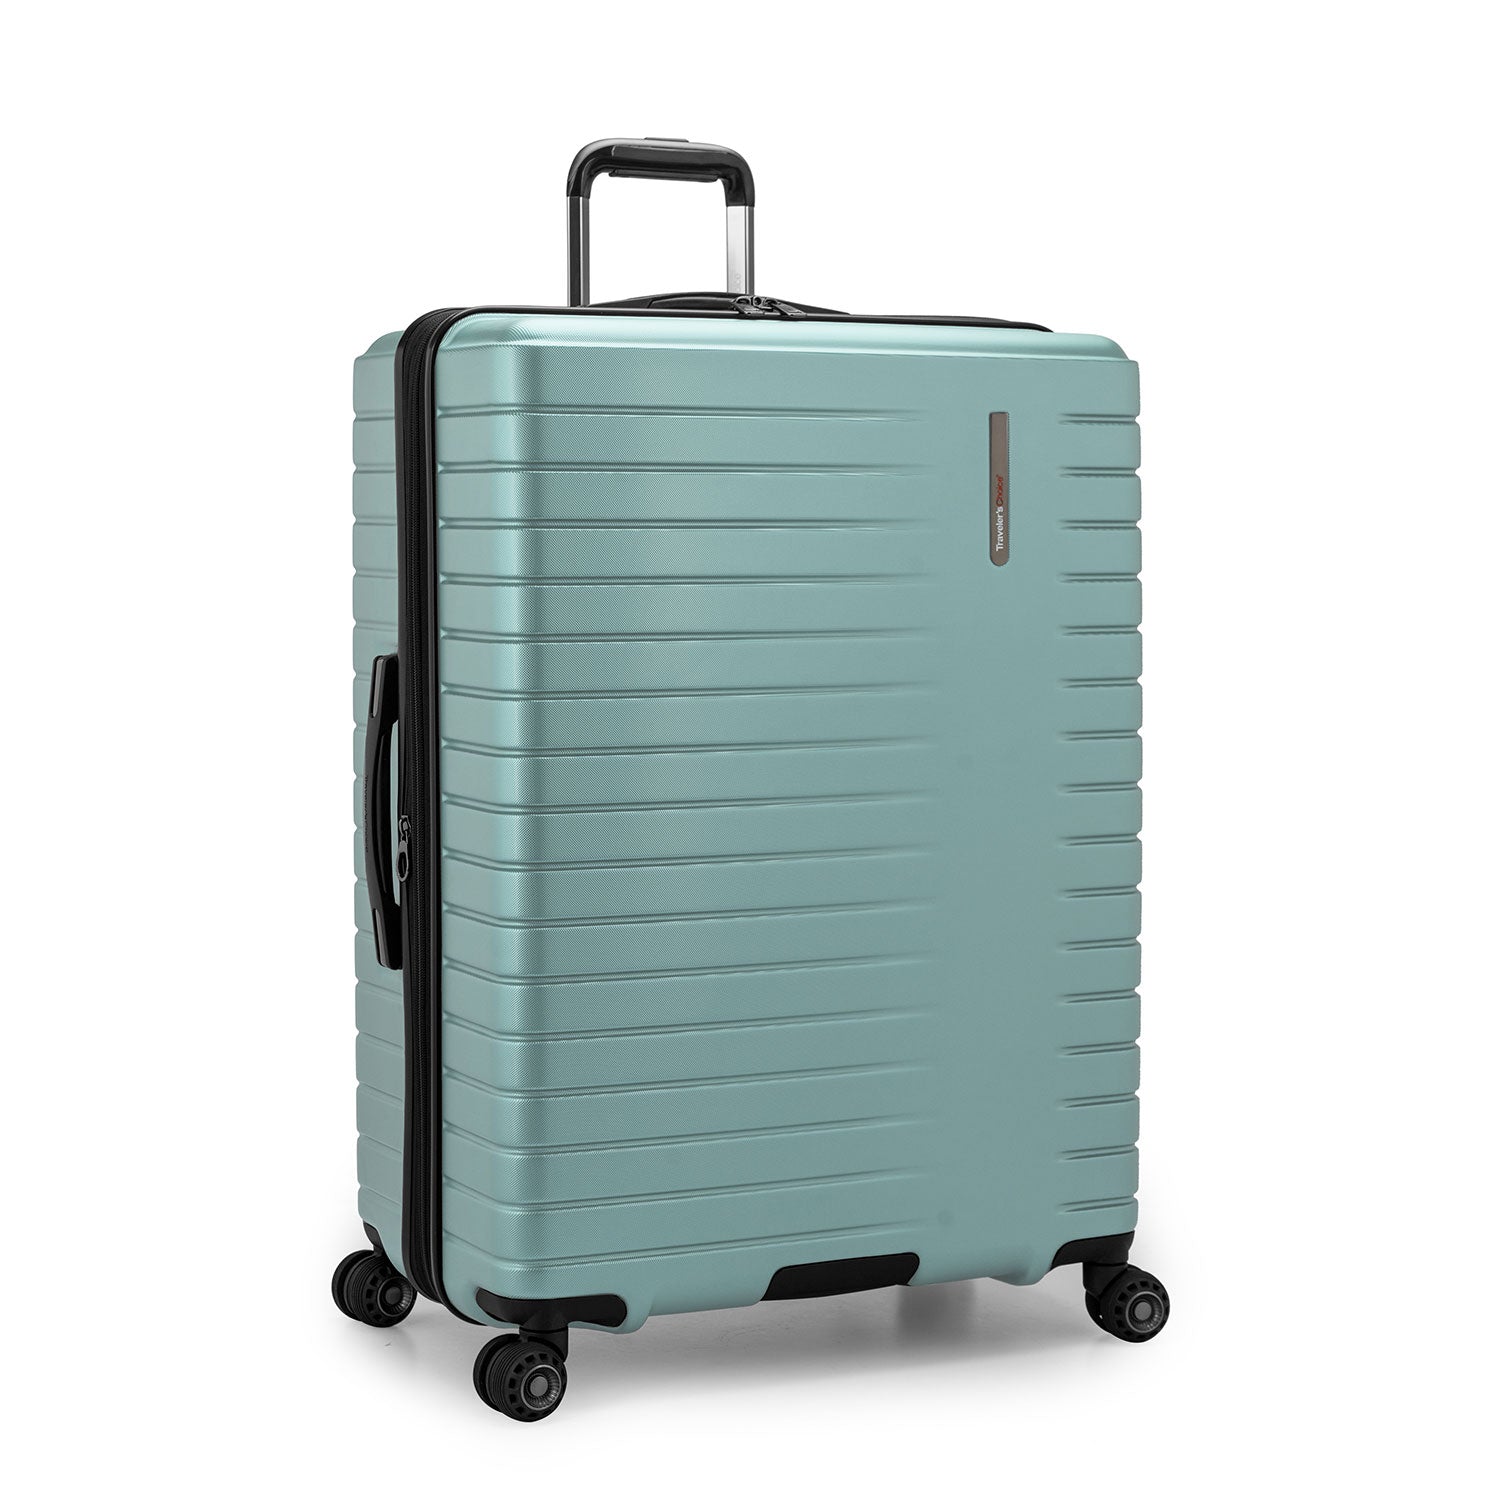 Archer Large Checked Luggage Suitcase Piece with 4 Spinner Wheels